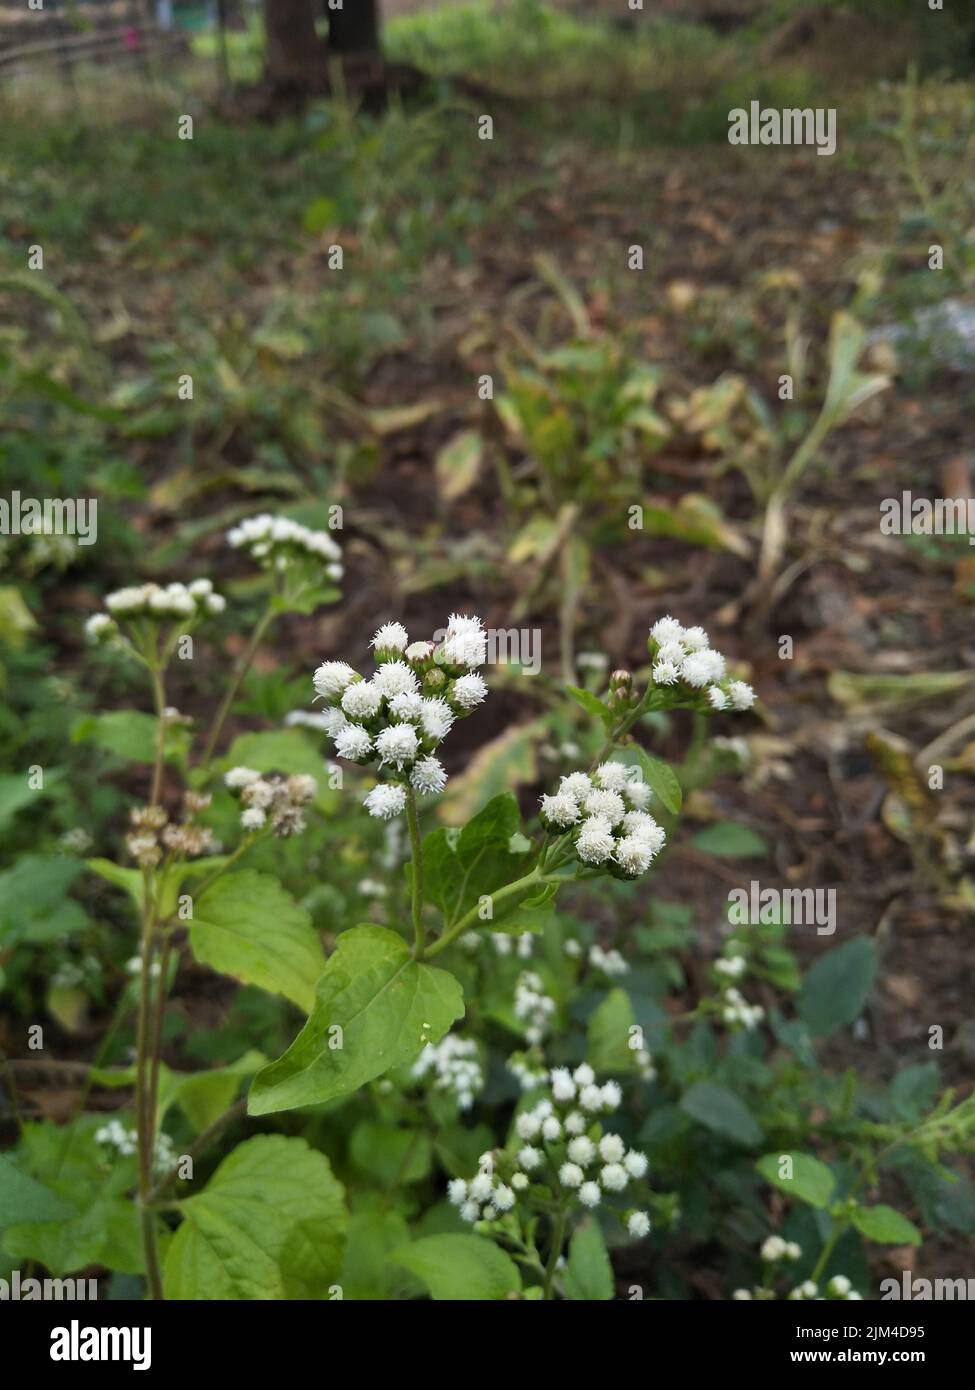 Ageratum conyzoides is native to Tropical America, especially Brazil, and is an invasive weed in many other regions. Billygoat weed Stock Photo